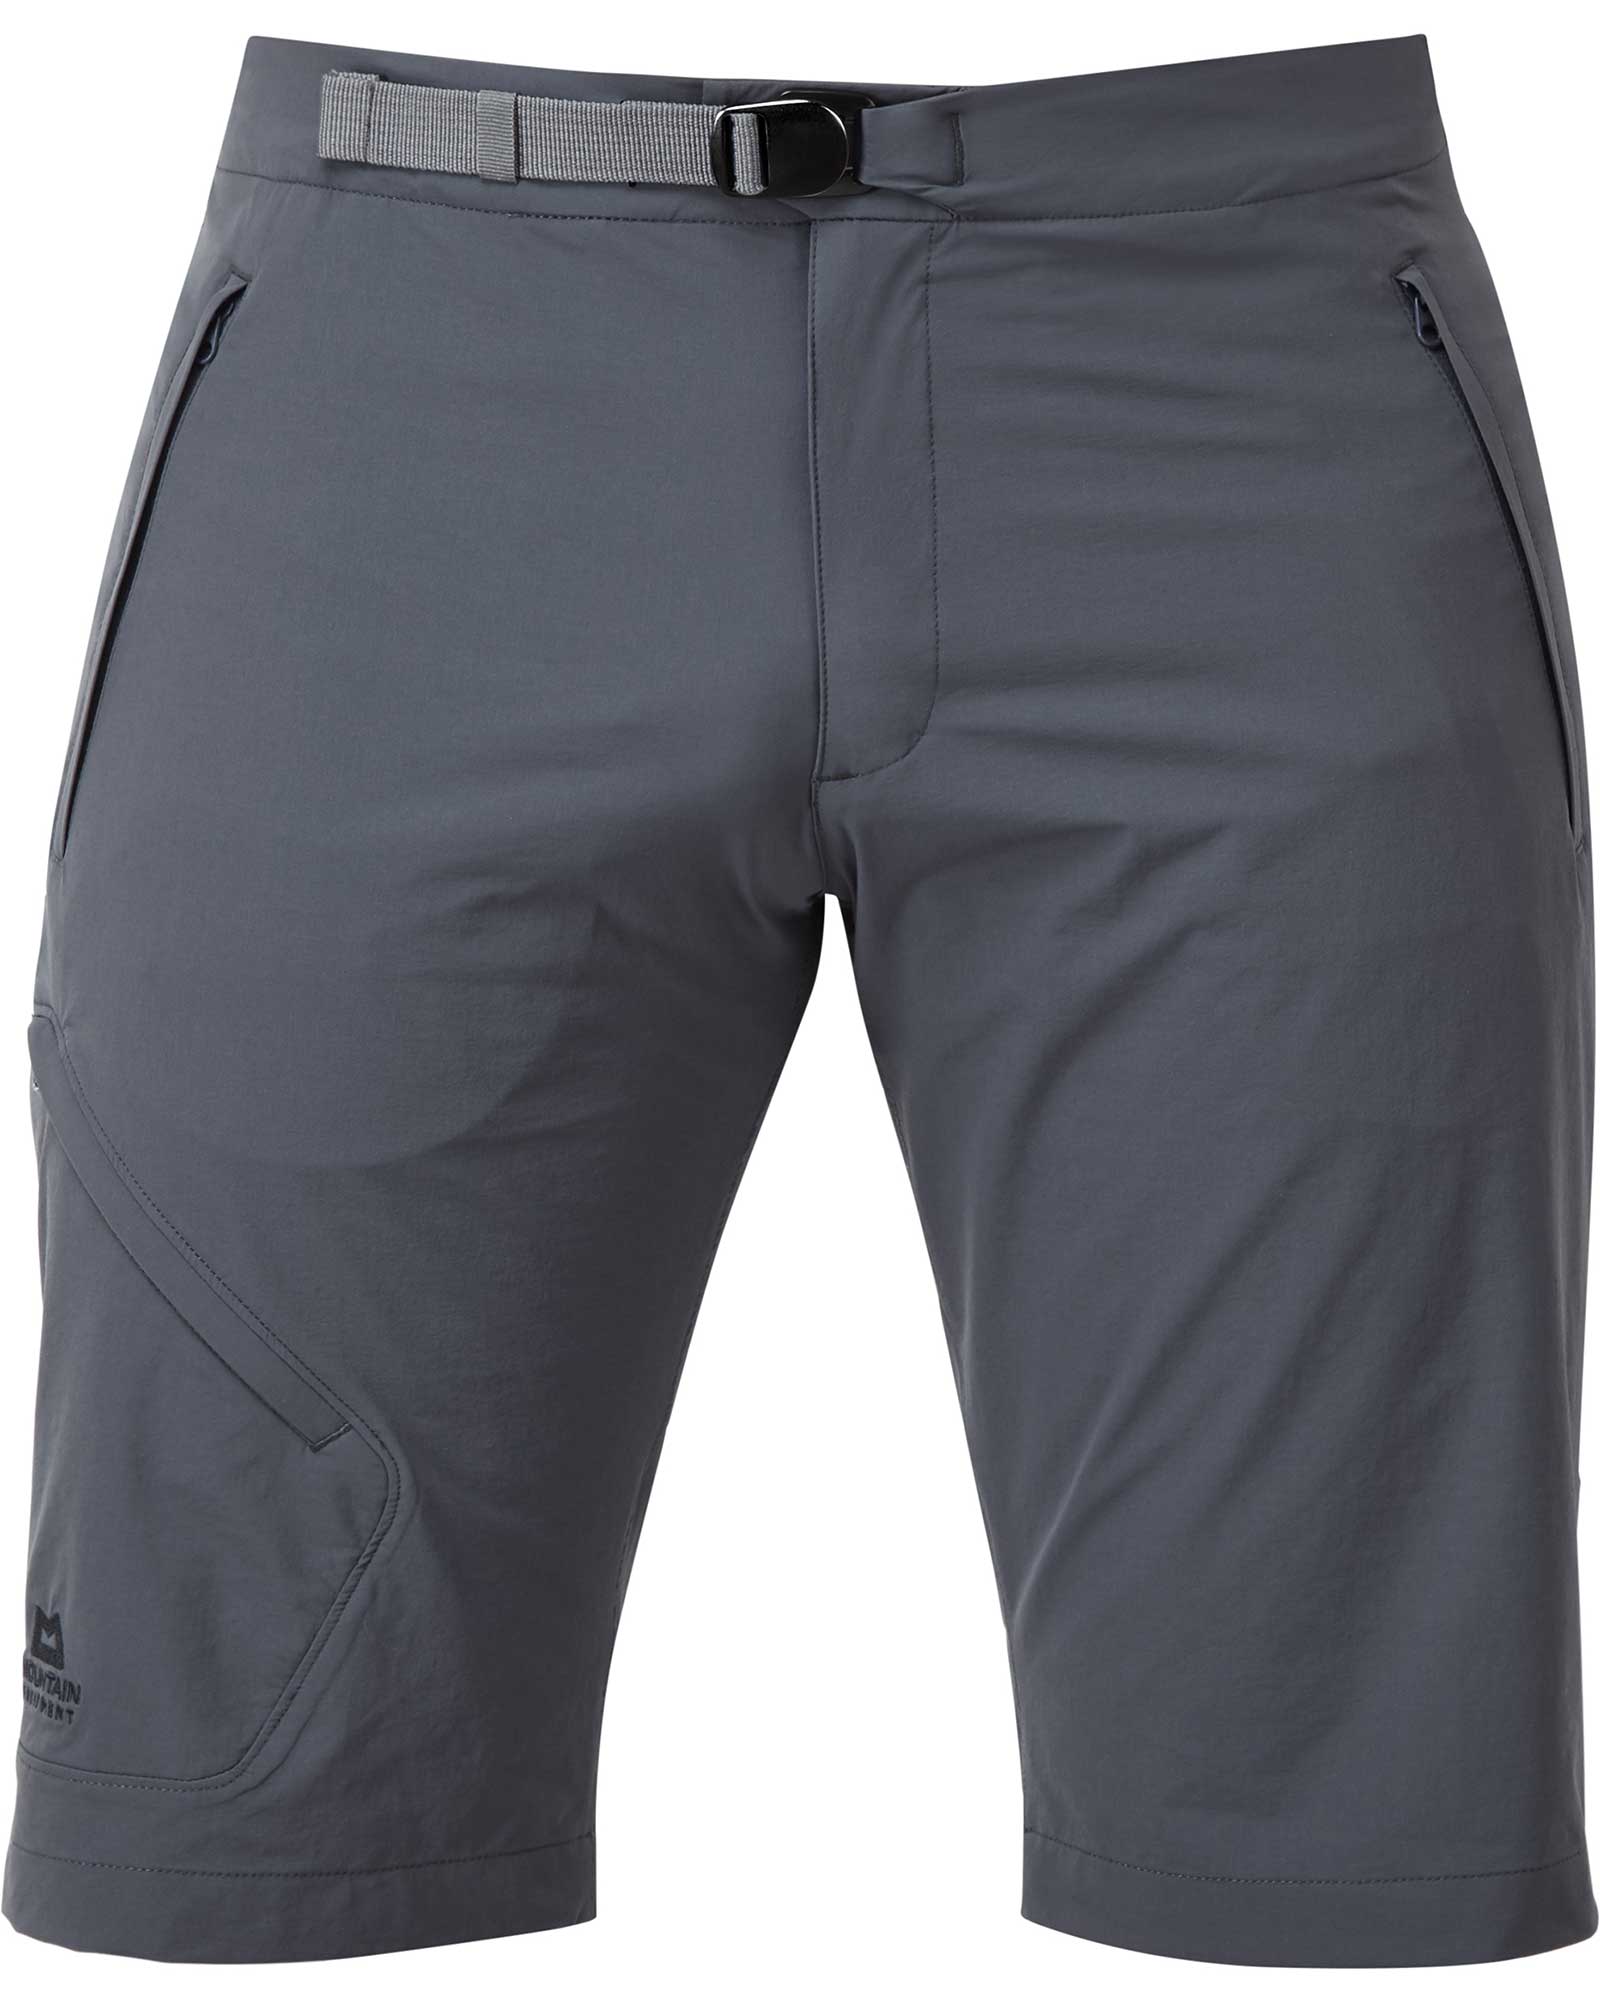 Product image of Mountain equipment Comici Men's Shorts